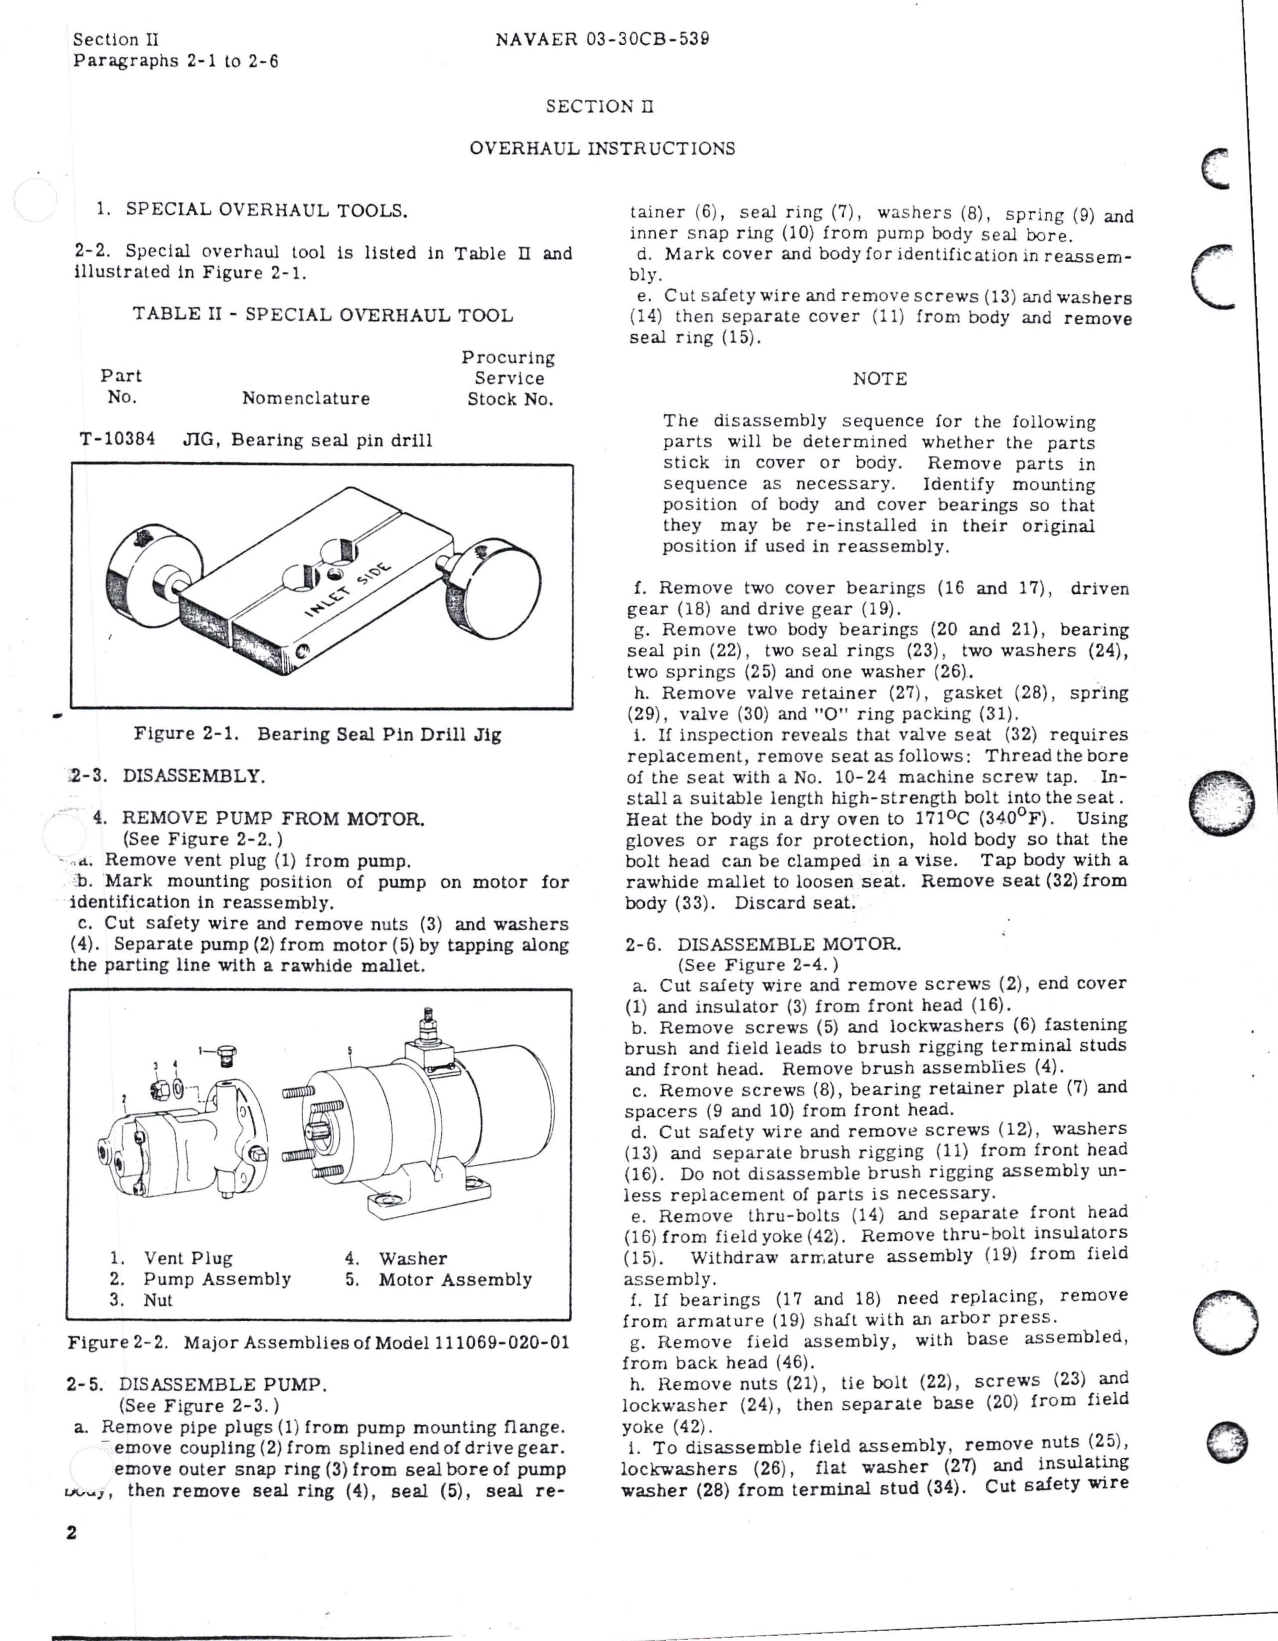 Sample page 5 from AirCorps Library document: Overhaul Instructions for Elect Motor Driven Hydraulic Gear Type Pump - 111069 Series